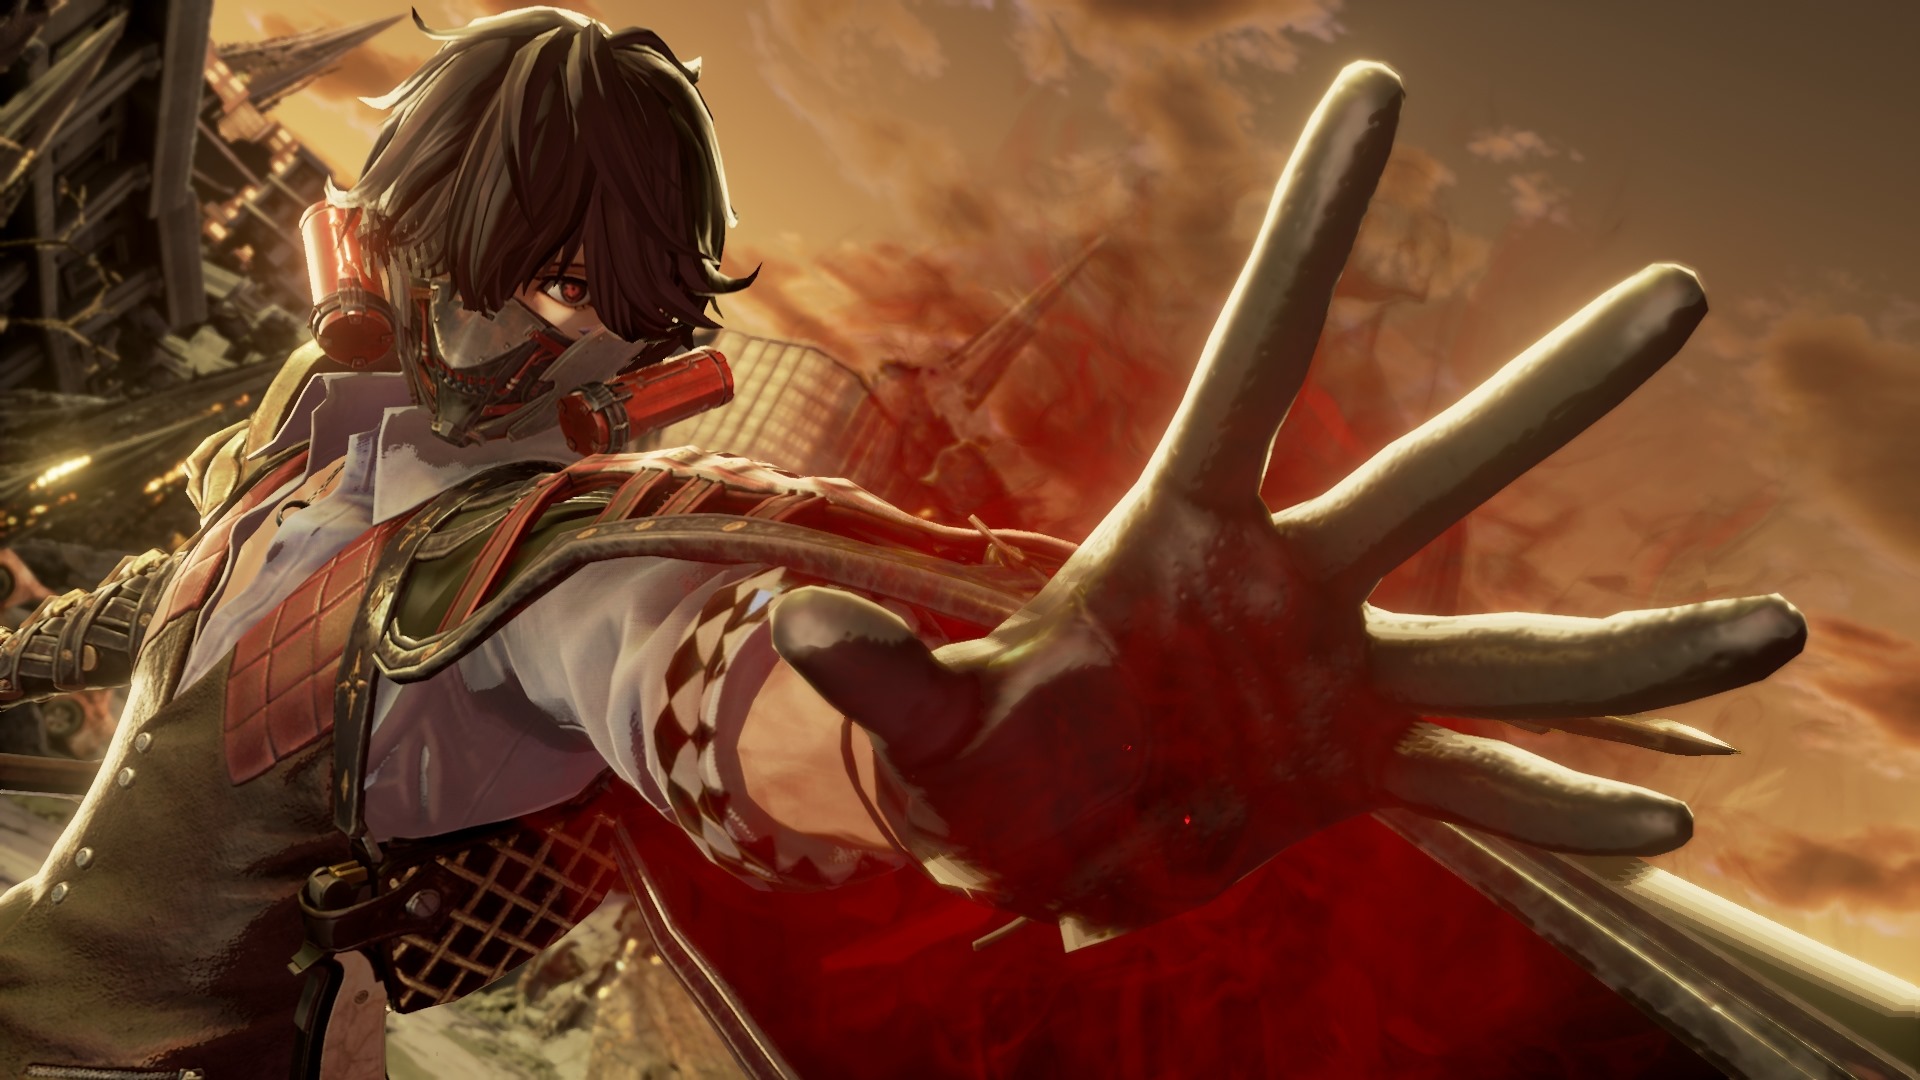 Code Vein's New Trailer Features Key Characters, Battles, And Its Animation  By Ufotable - Siliconera